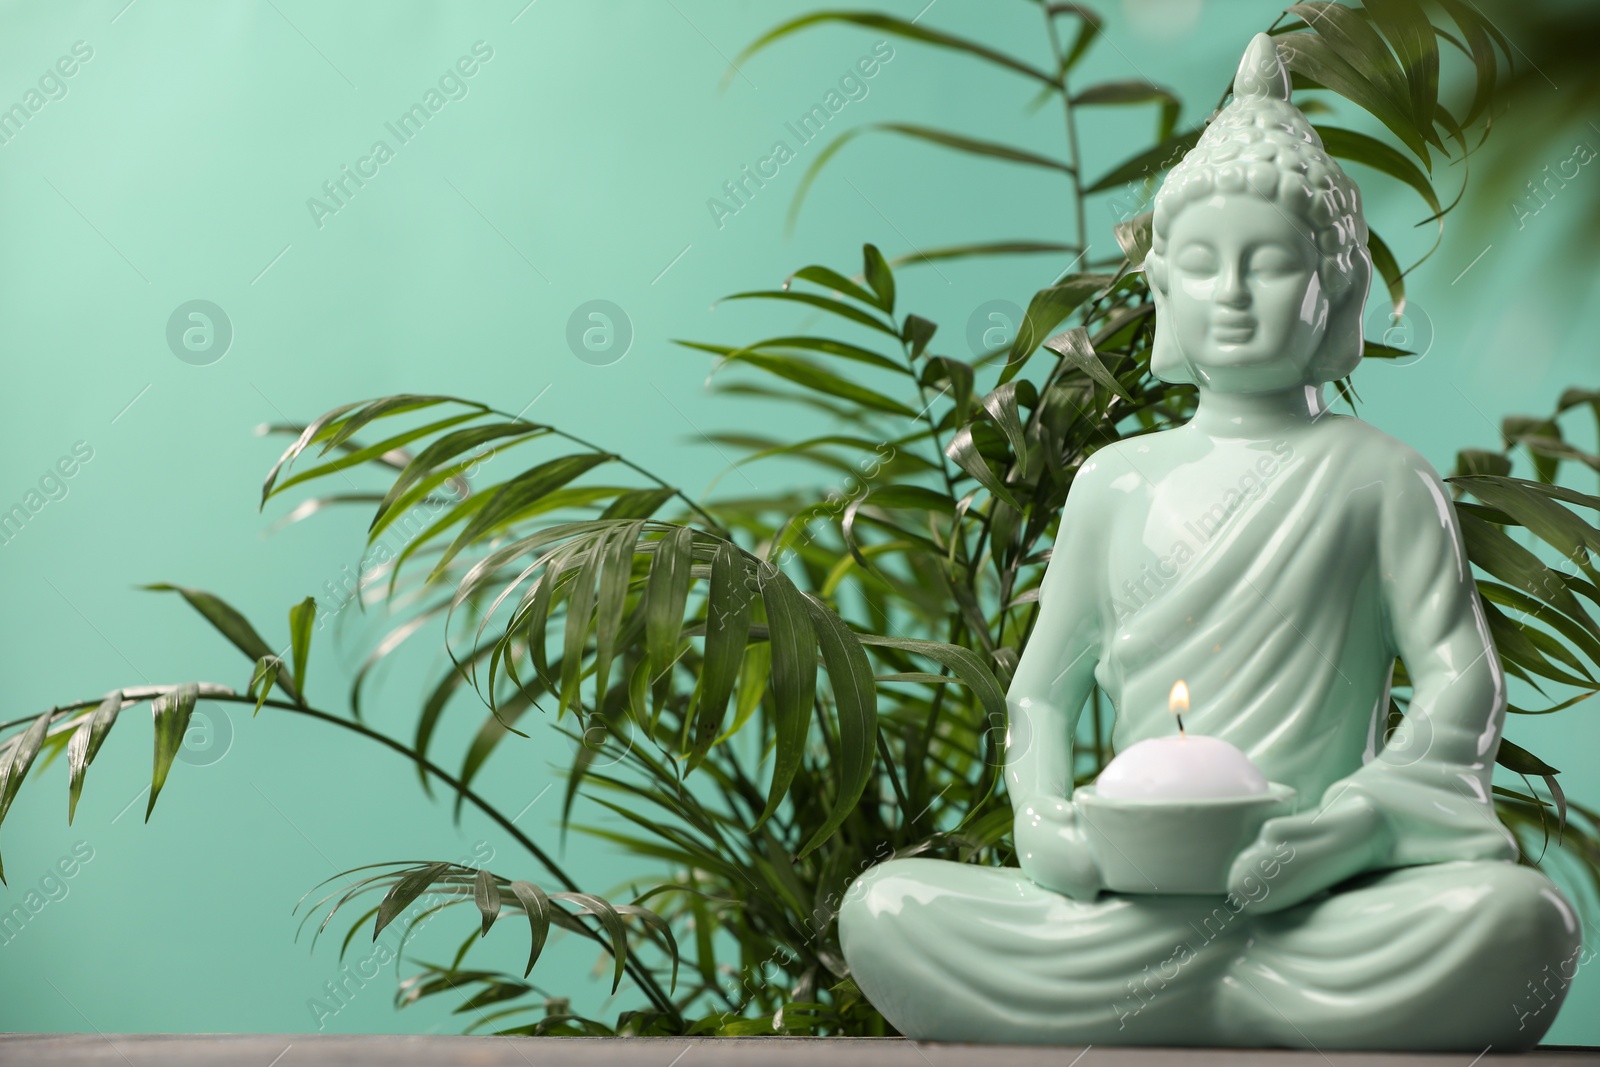 Photo of Buddhism religion. Decorative Buddha statue with burning candle on table and houseplant against turquoise wall